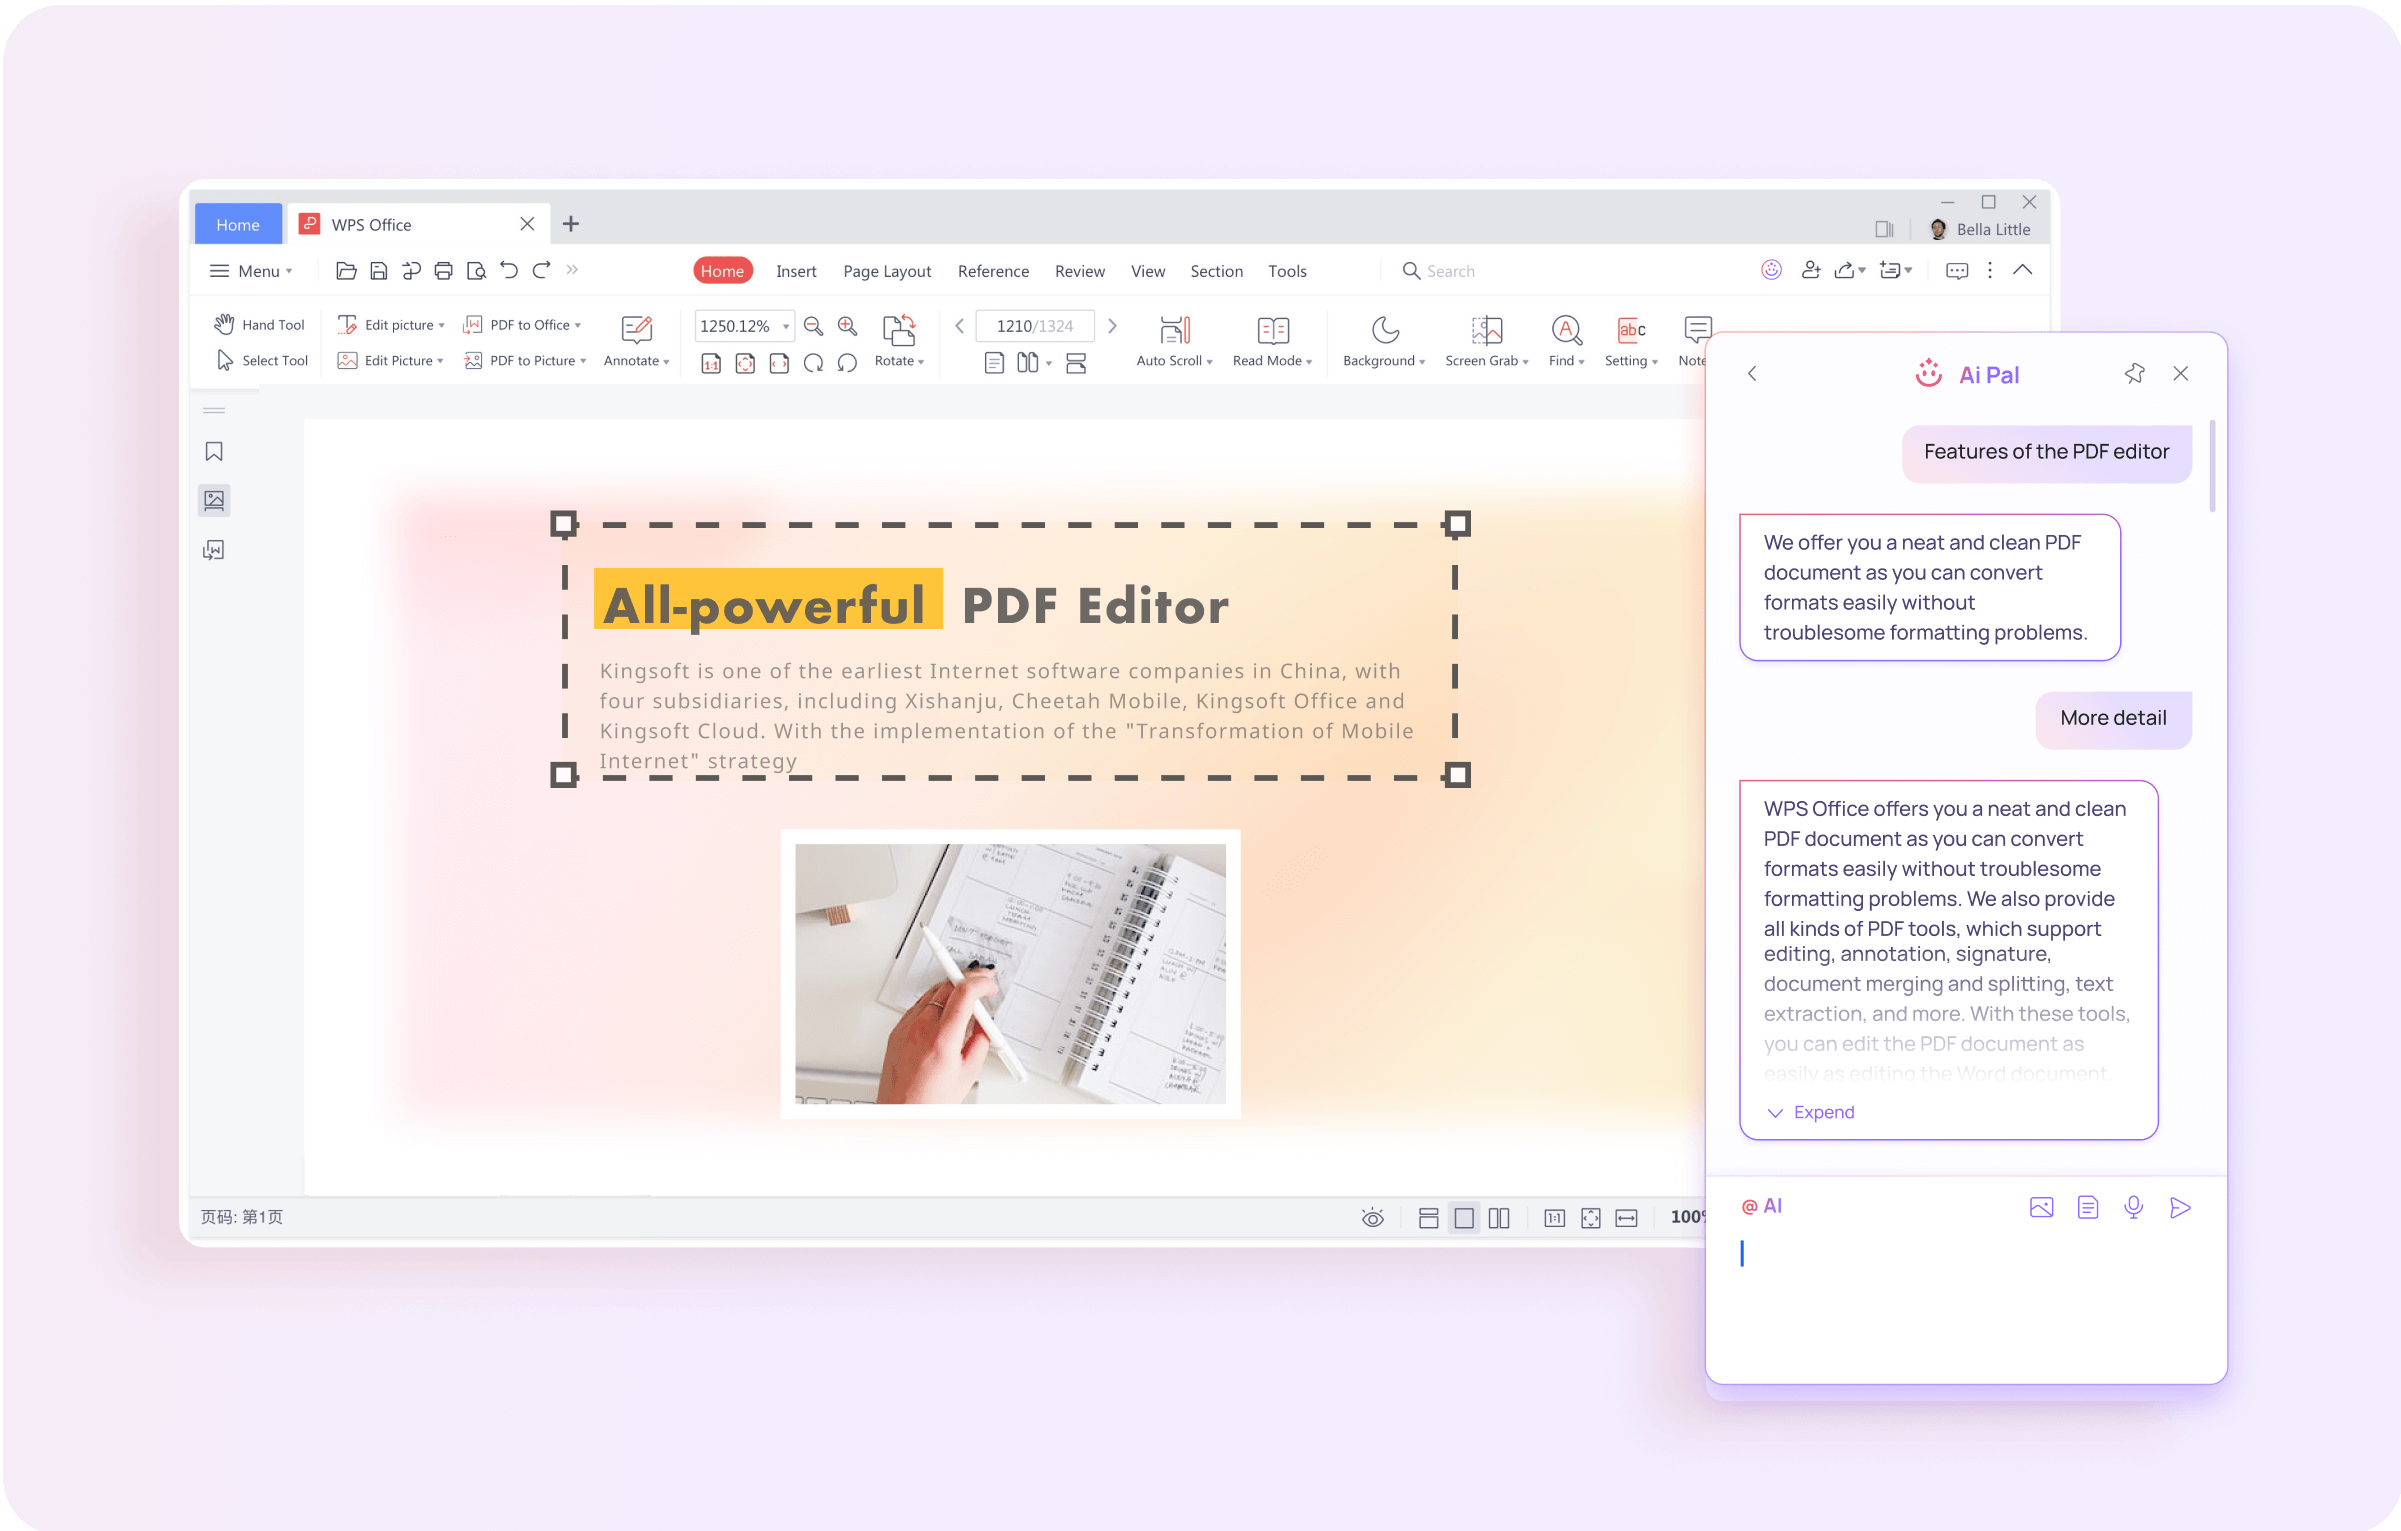 Chat with PDFs